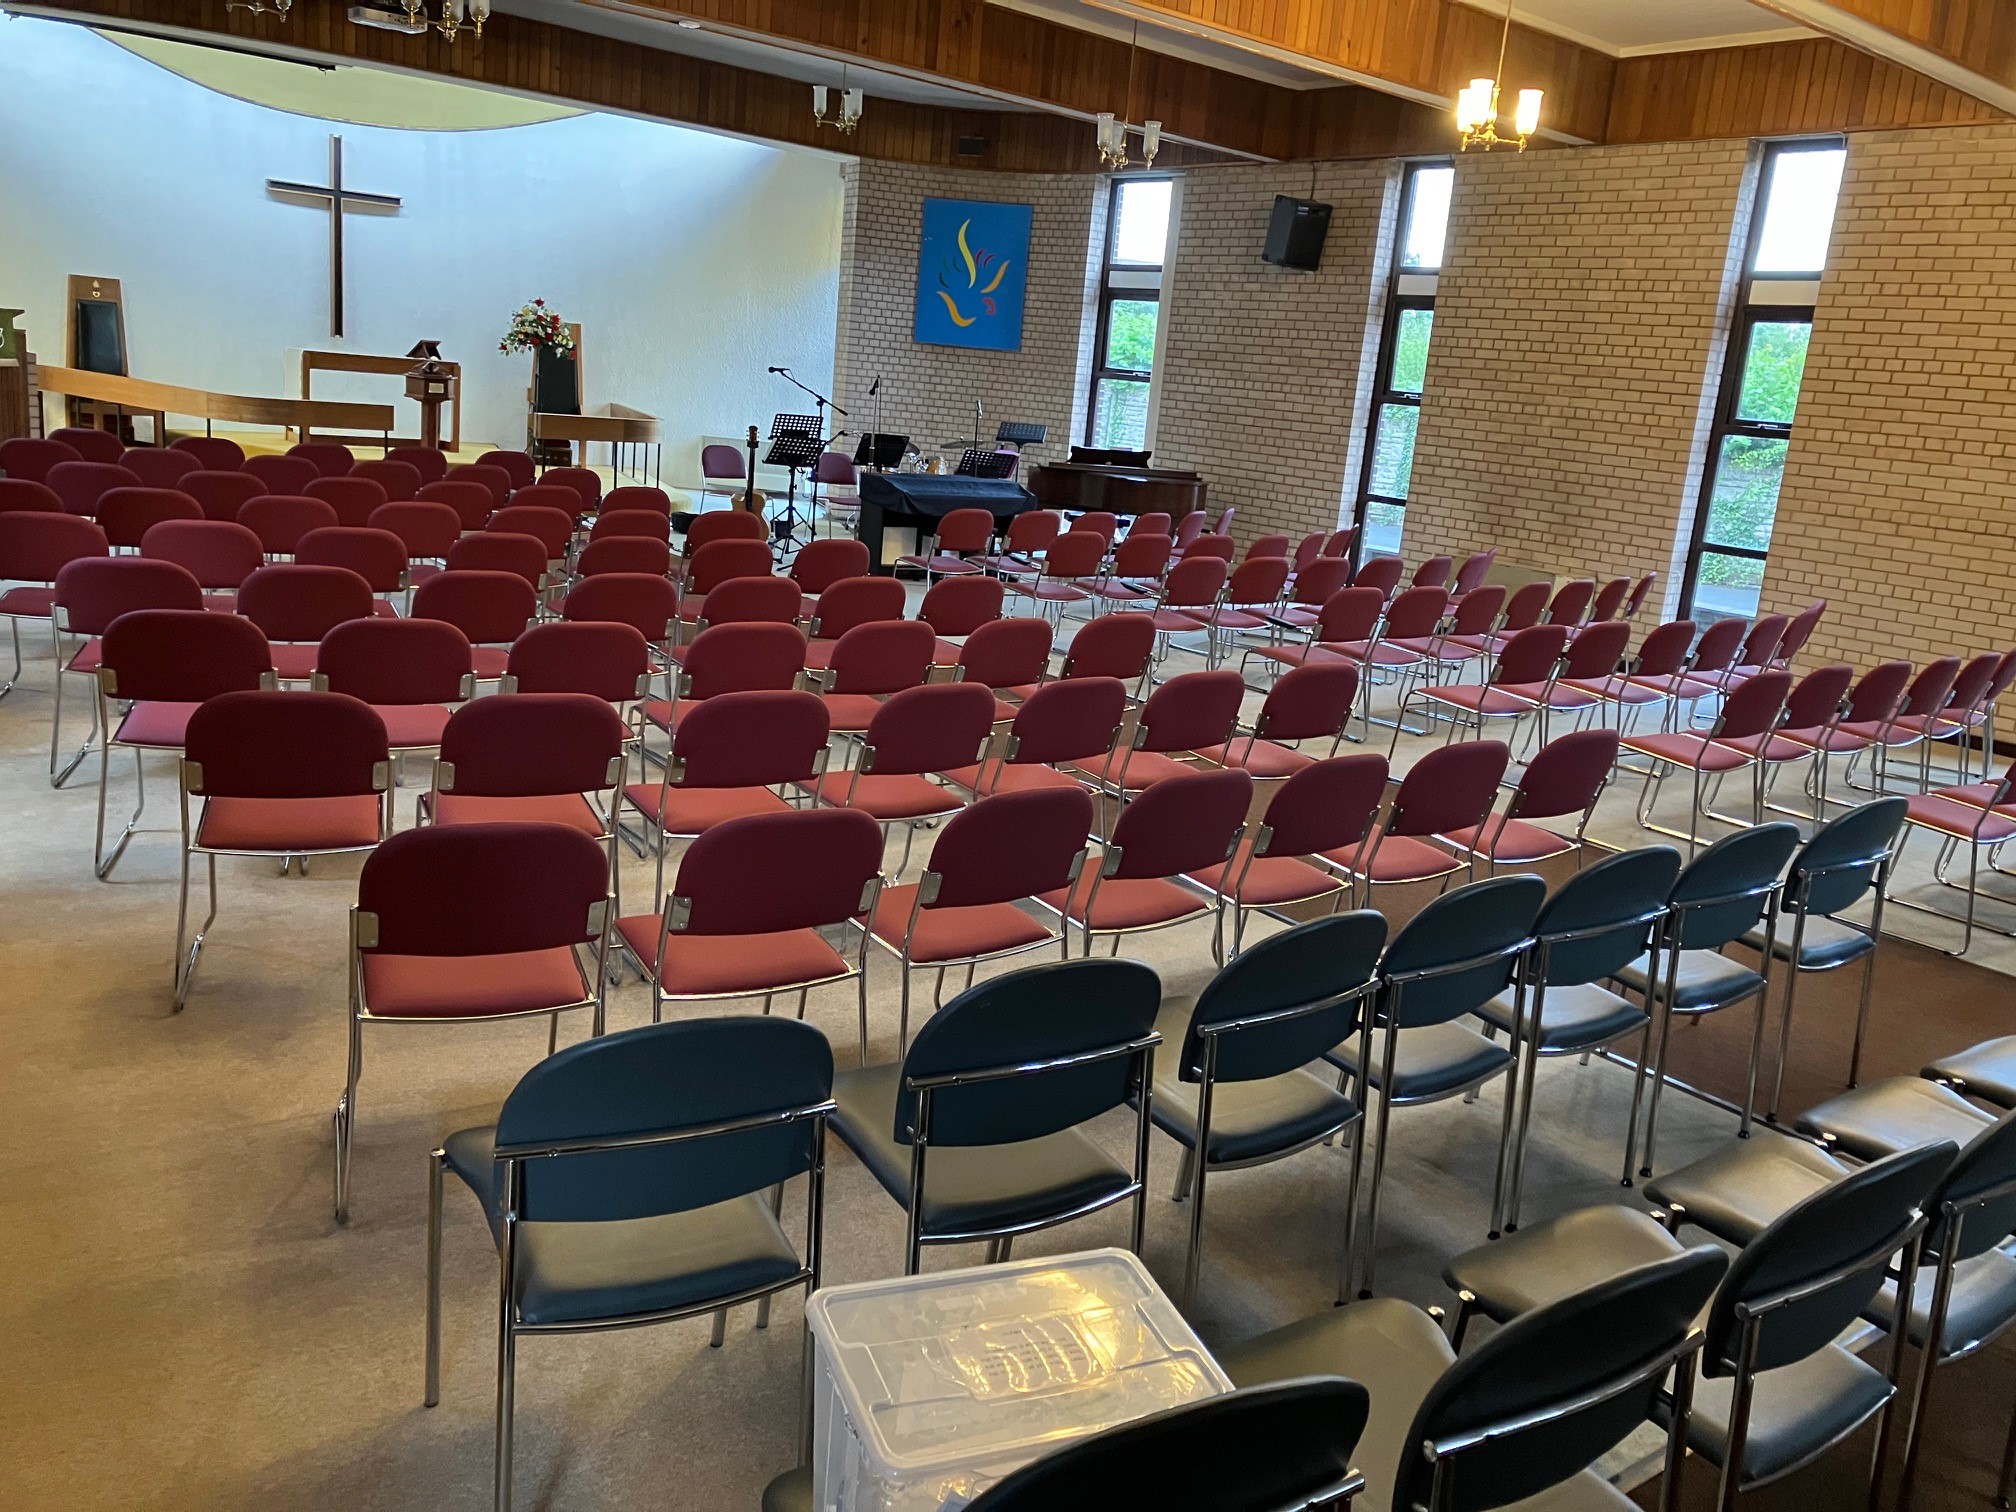 Photo showing chairs have replaced pews